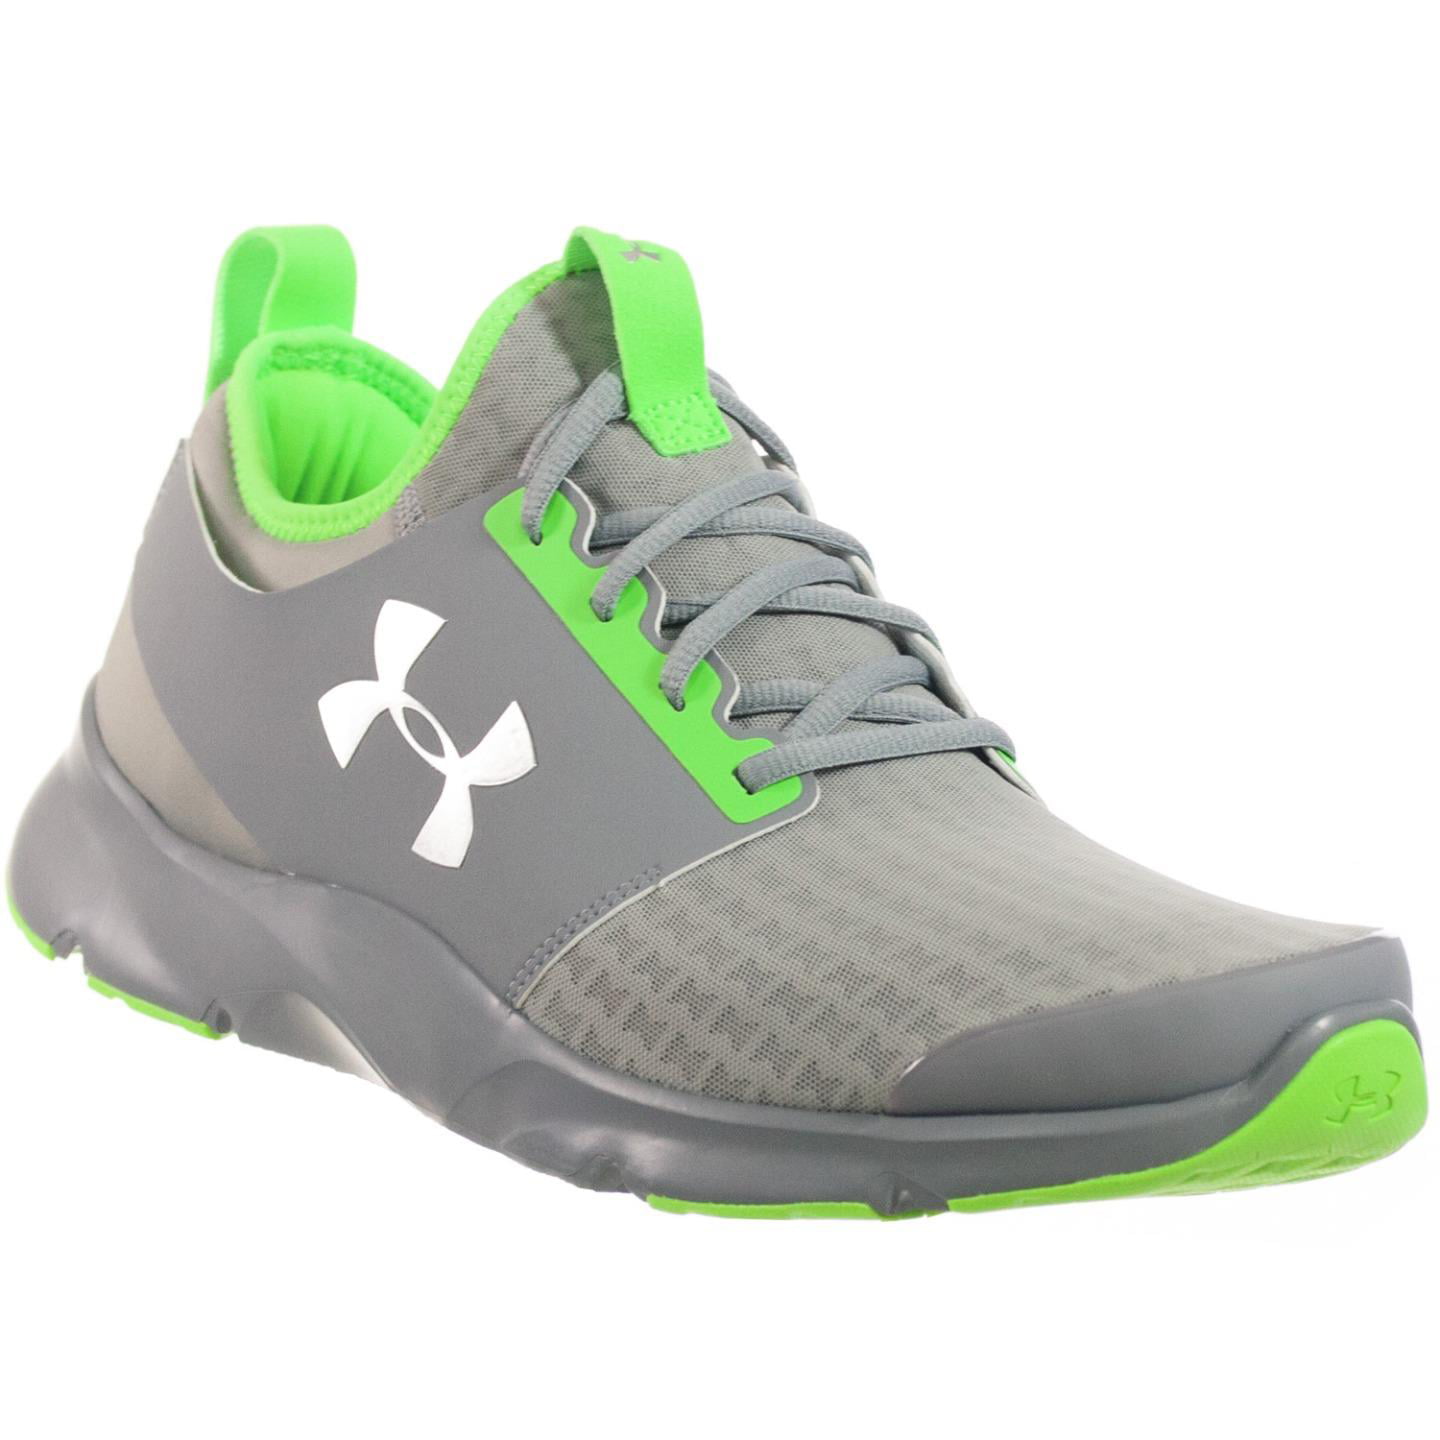 Under Armour Drift Running Shoes Mens Fitness Jogging Trainers Sneakers 